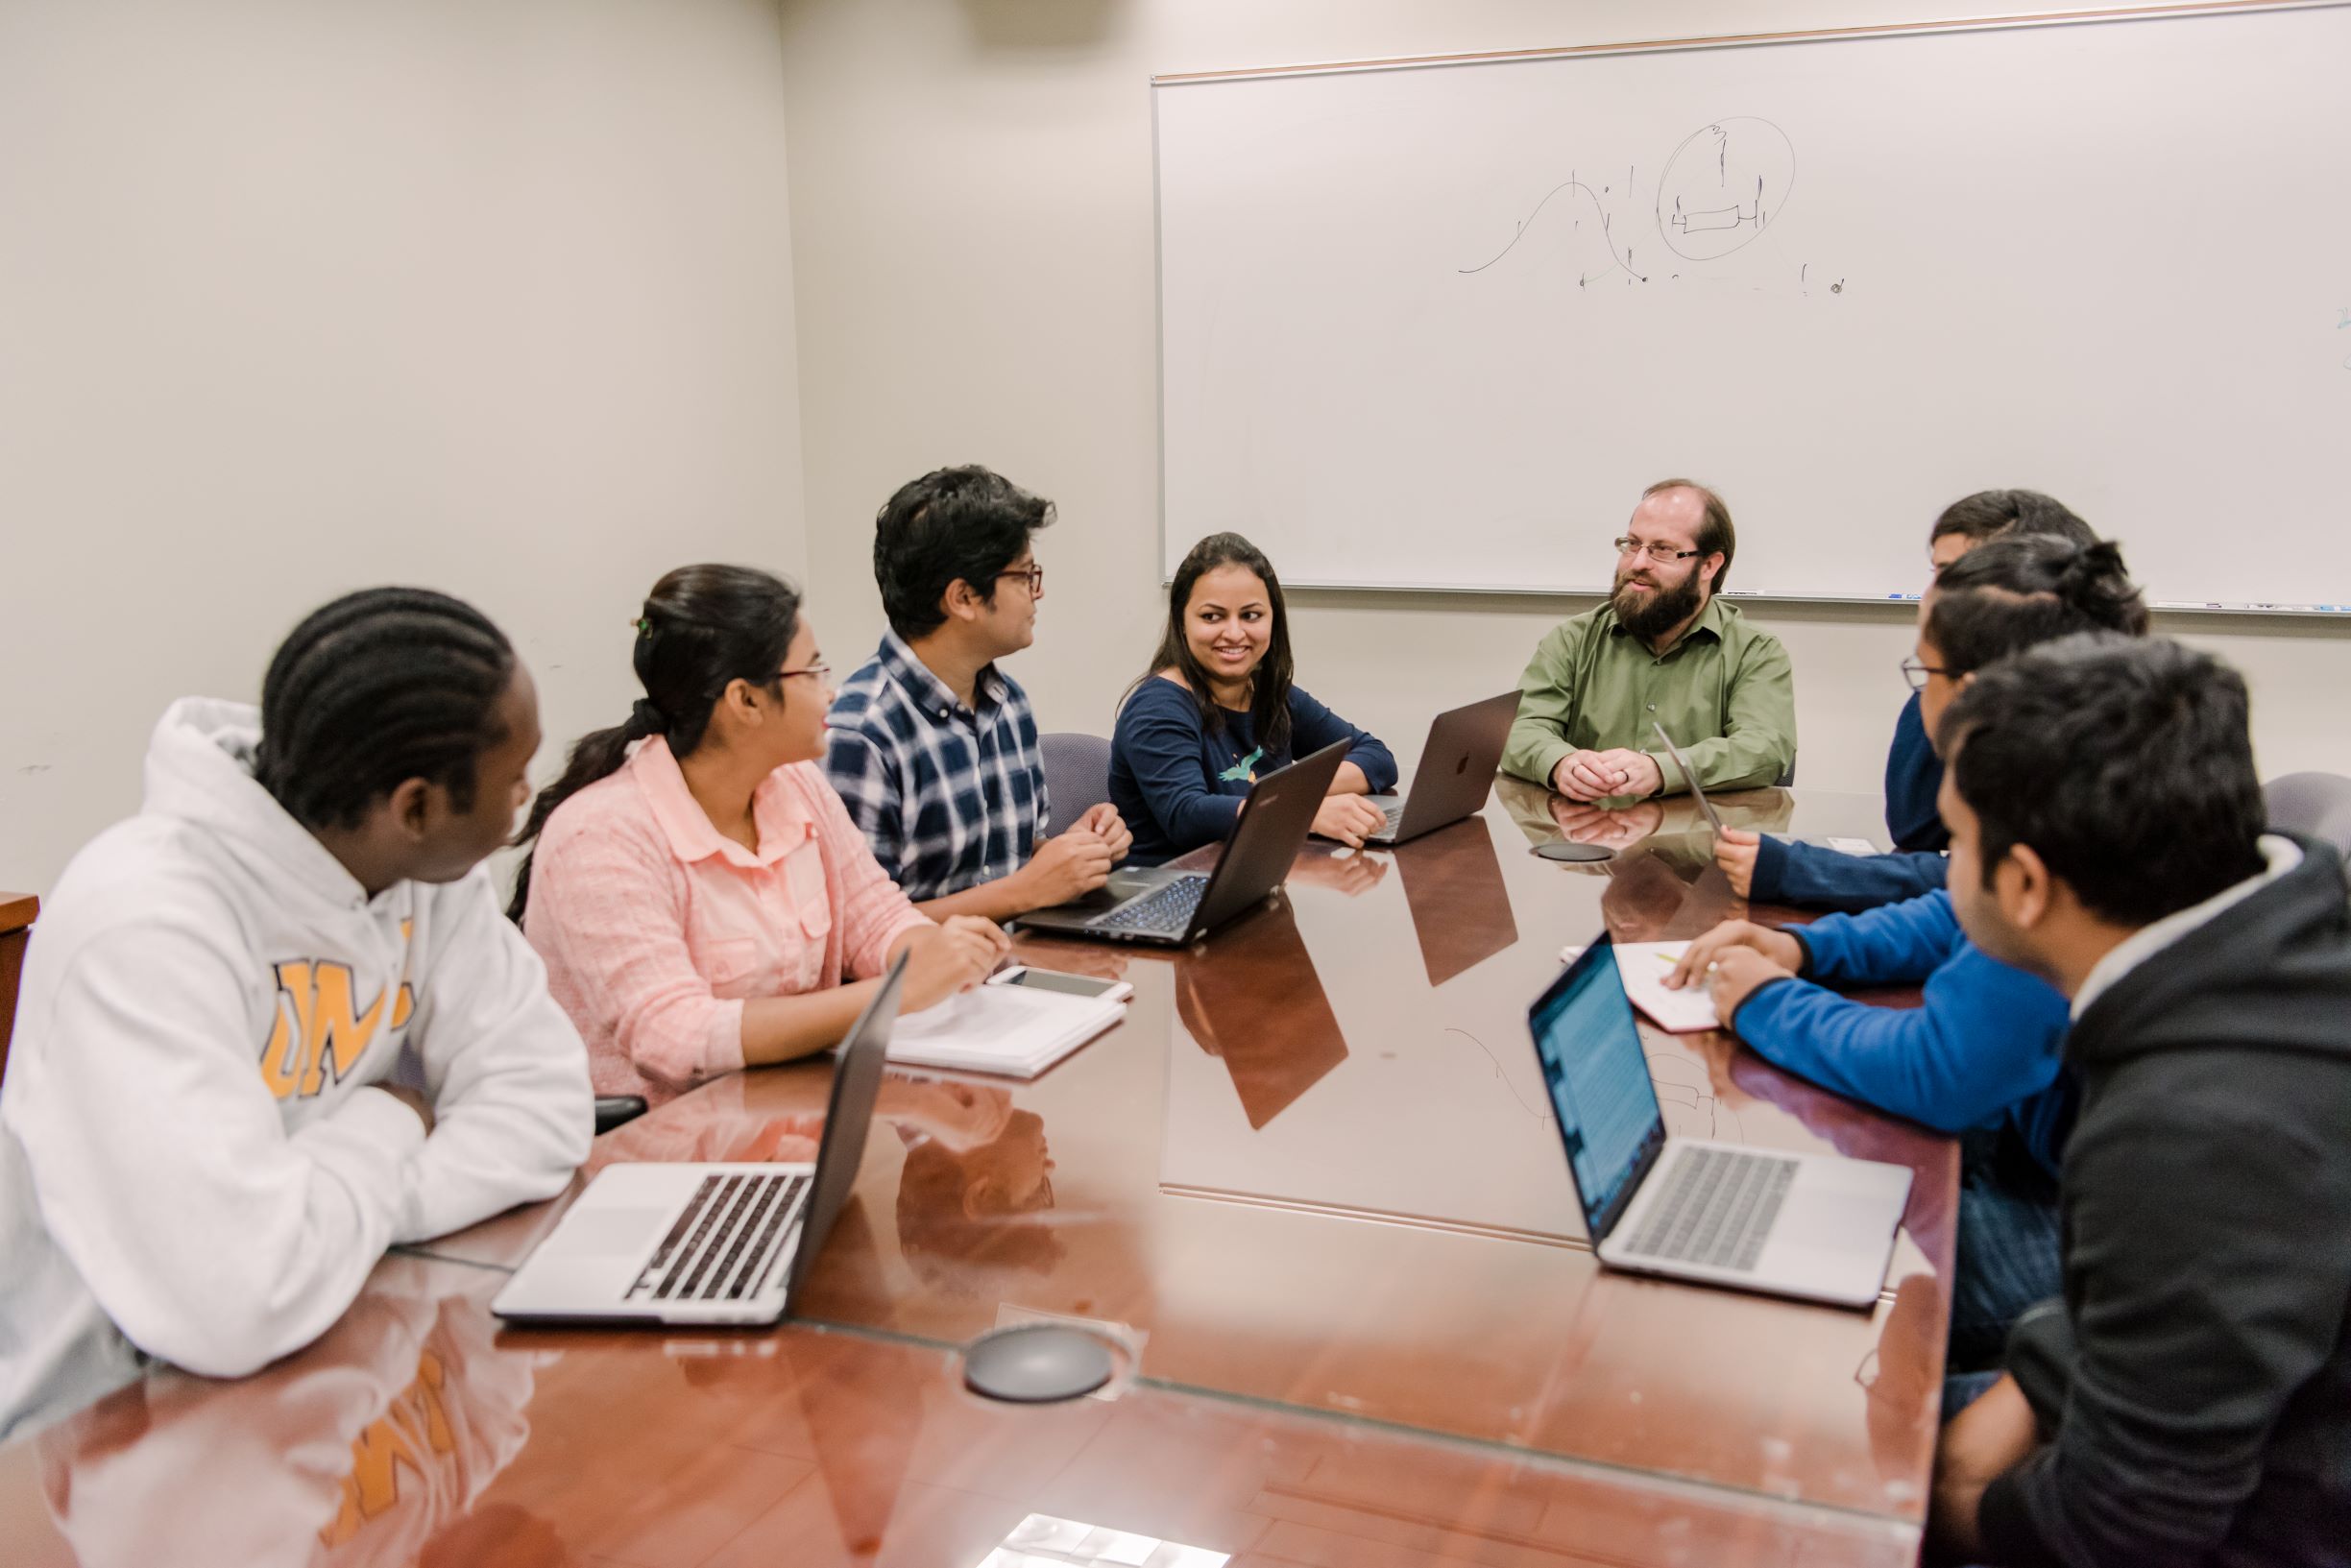 Seven students and a professor sit around a conference table. Five students have open laptops and two are taking notes on paper.